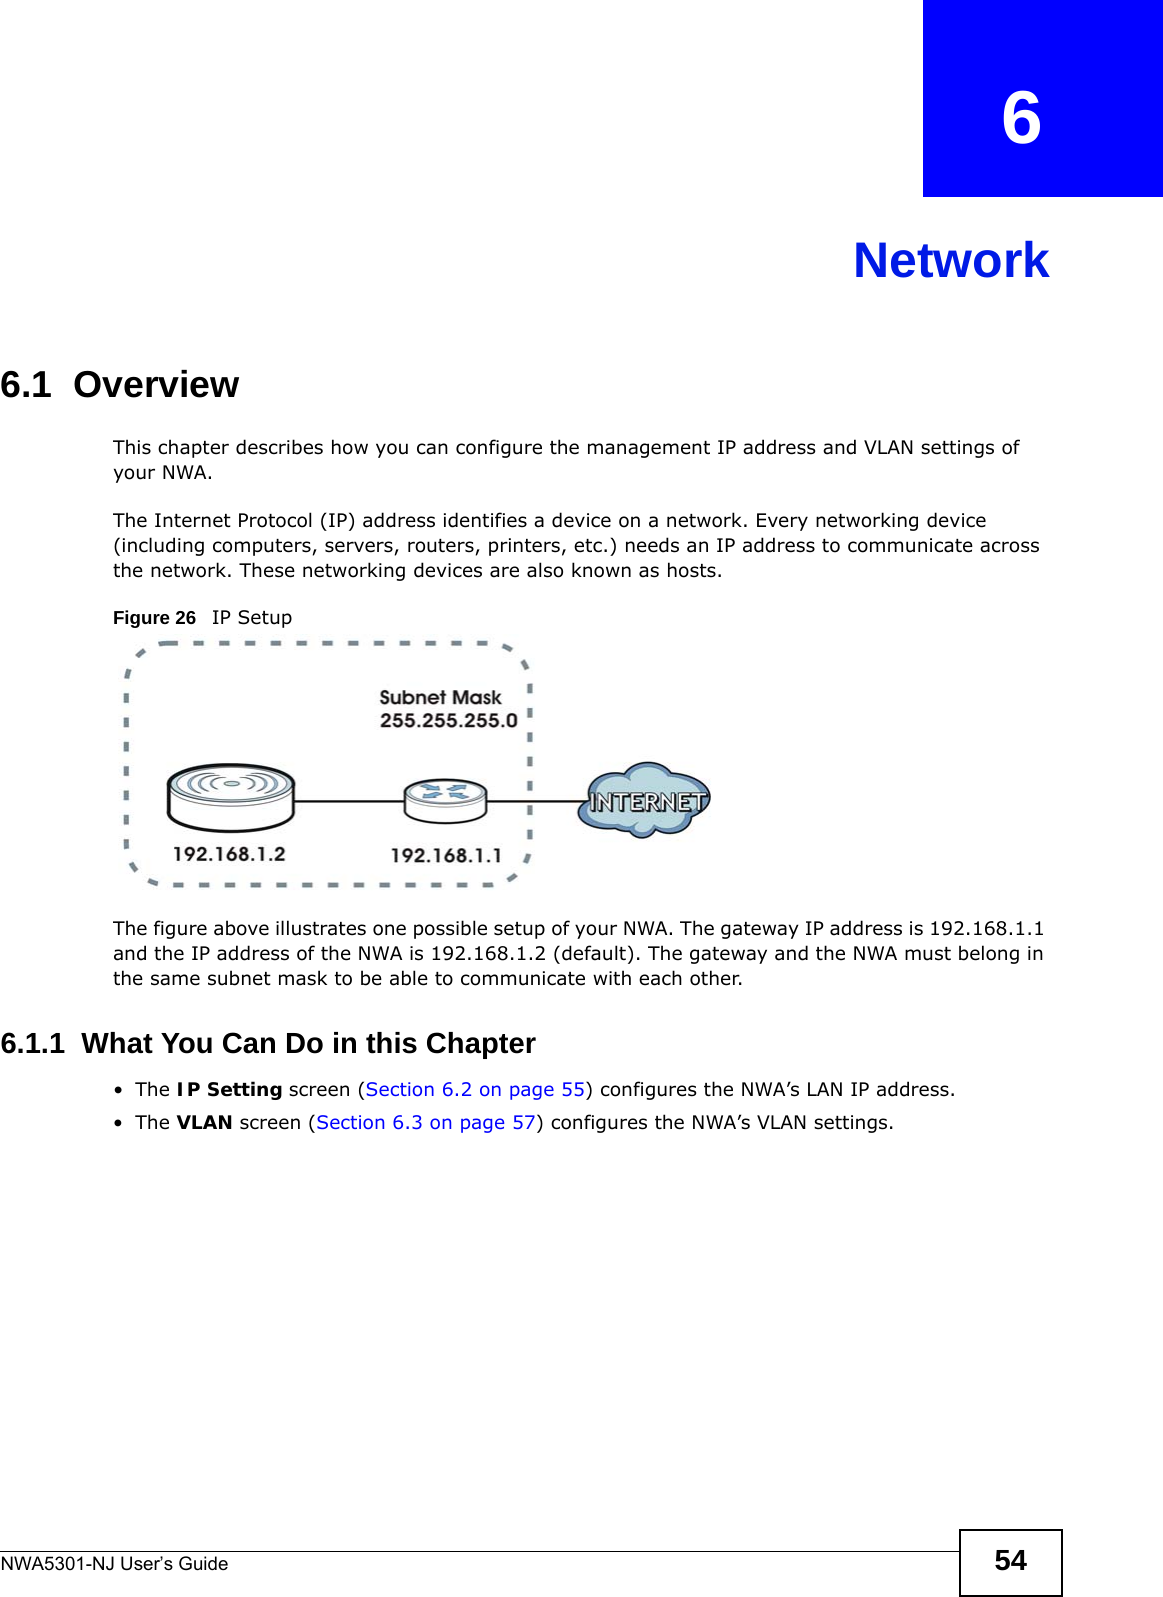 NWA5301-NJ User’s Guide 54CHAPTER   6Network6.1  OverviewThis chapter describes how you can configure the management IP address and VLAN settings of your NWA.The Internet Protocol (IP) address identifies a device on a network. Every networking device (including computers, servers, routers, printers, etc.) needs an IP address to communicate across the network. These networking devices are also known as hosts.Figure 26   IP SetupThe figure above illustrates one possible setup of your NWA. The gateway IP address is 192.168.1.1 and the IP address of the NWA is 192.168.1.2 (default). The gateway and the NWA must belong in the same subnet mask to be able to communicate with each other.6.1.1  What You Can Do in this Chapter•The IP Setting screen (Section 6.2 on page 55) configures the NWA’s LAN IP address. •The VLAN screen (Section 6.3 on page 57) configures the NWA’s VLAN settings. 